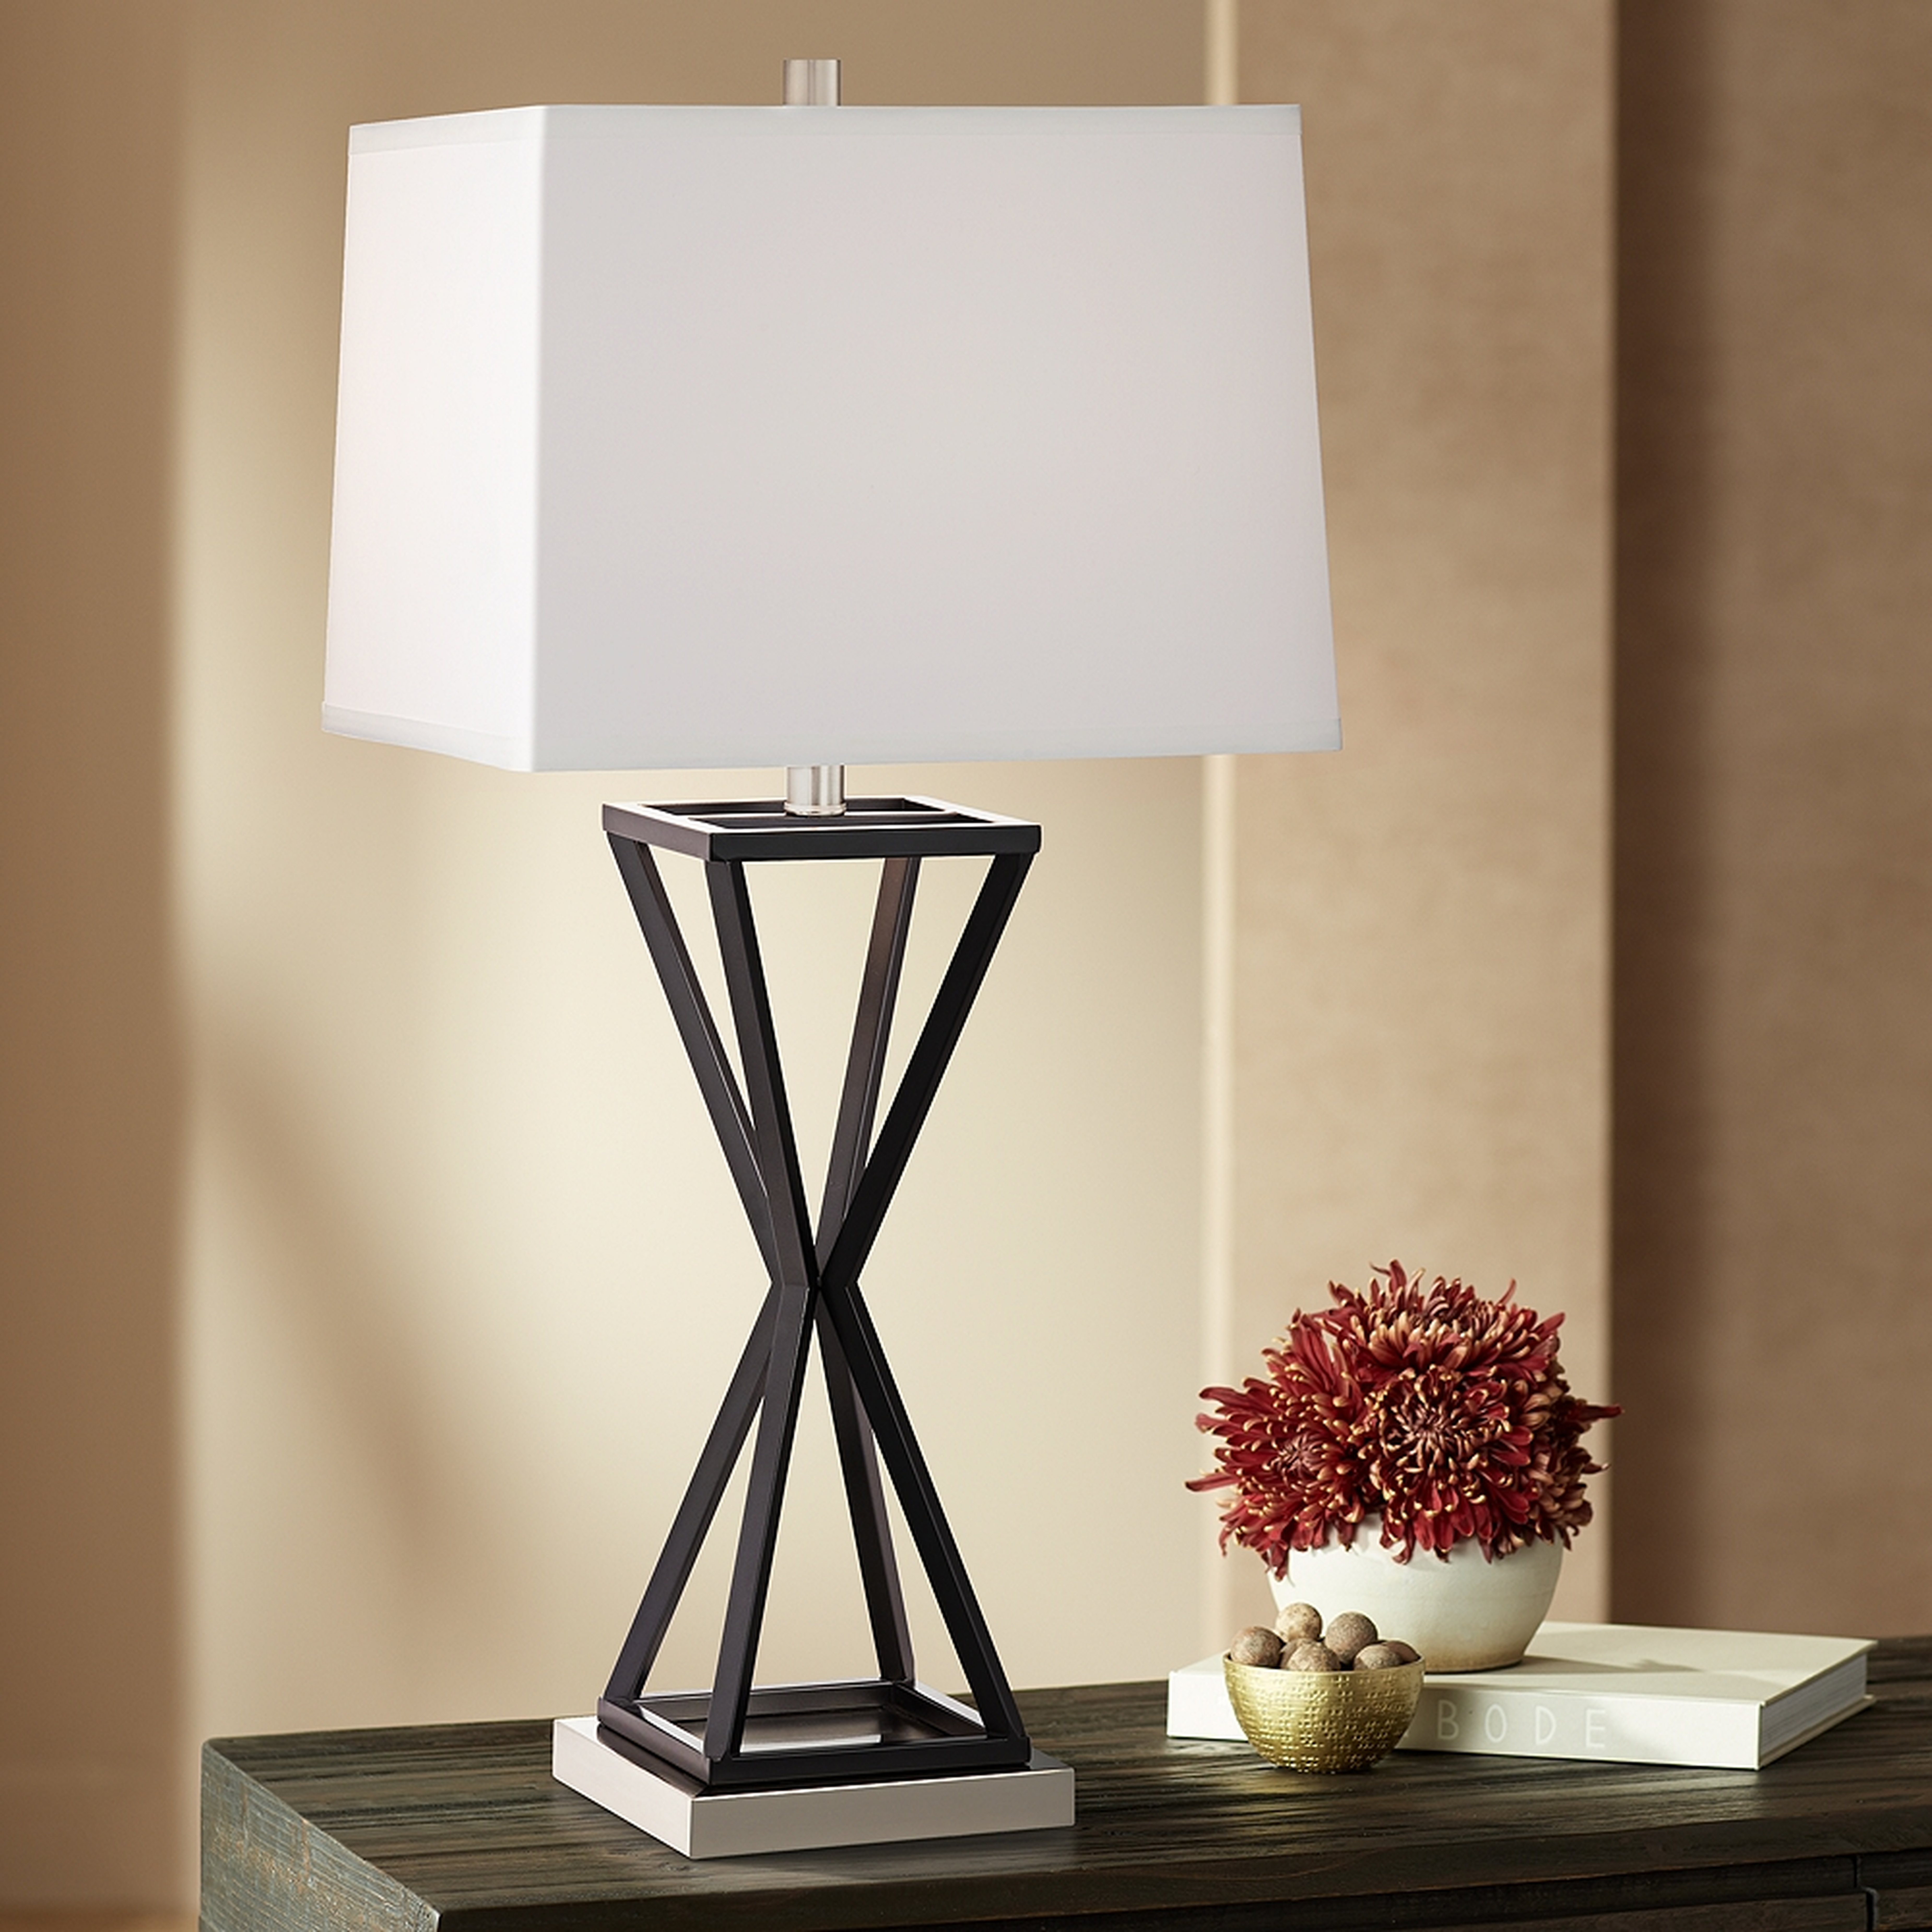 Opus Oil-Rubbed Bronze Finish Metal Open Concave Table Lamp - Style # 78T17 - Lamps Plus